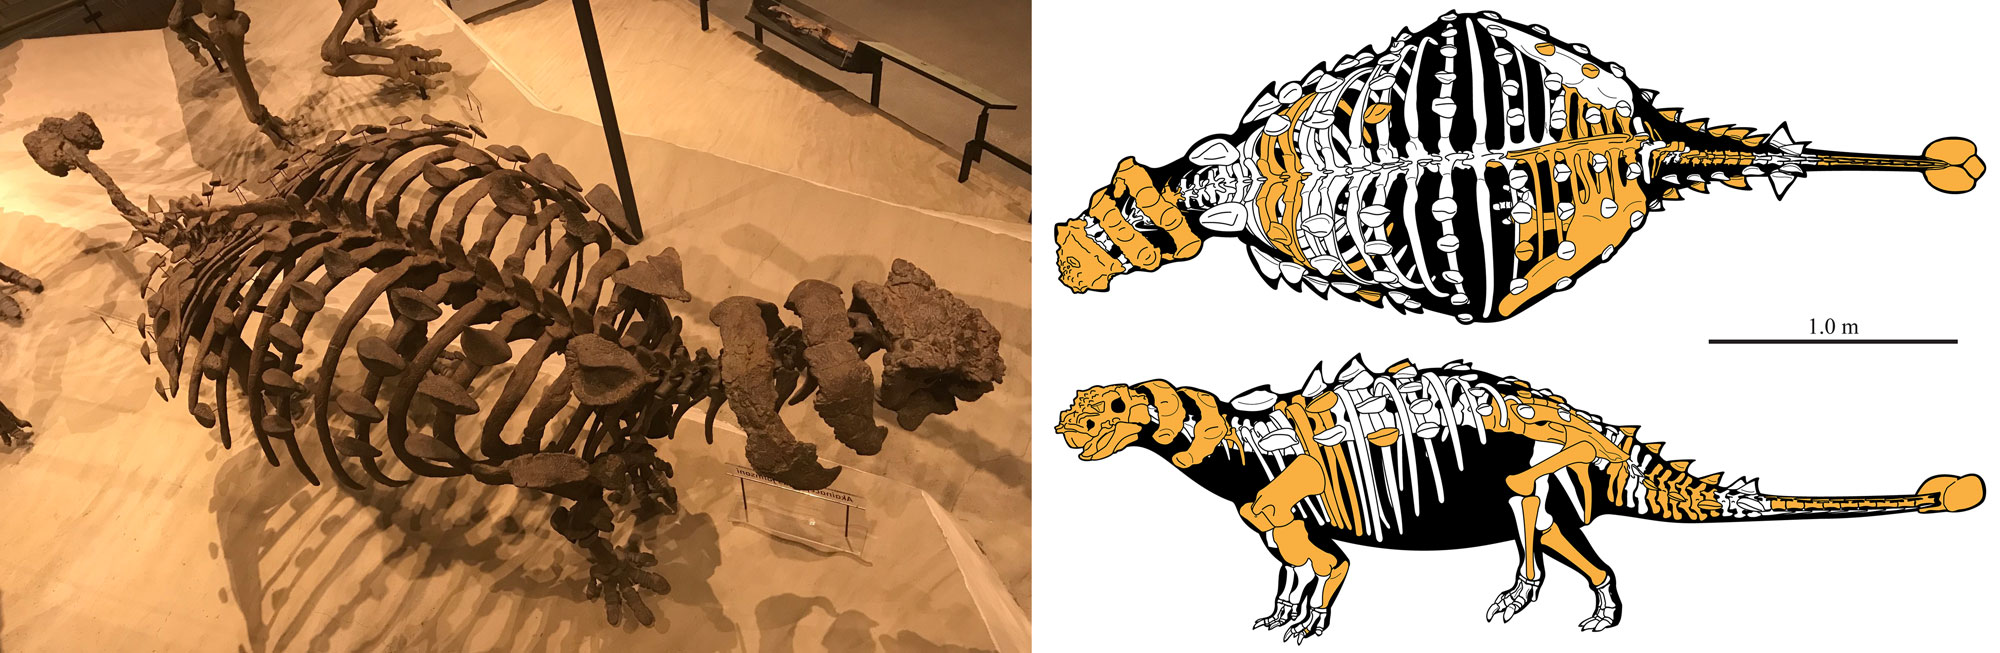 2-panel figure of the Cretaceous ankylosaur (armored dinosaur) Akainacephalus. Panel 1: Photograph of a reconstructed skeleton on display in a museum. This dinosaur is herbivorous, walks on all fours, has a tail with a bony club at the end, and large bony spikes on its back. Panel 2: Drawing illustrating the skeleton in top and side views. Bones that were actually found are colored orange, whereas the bones colored white are inferred.